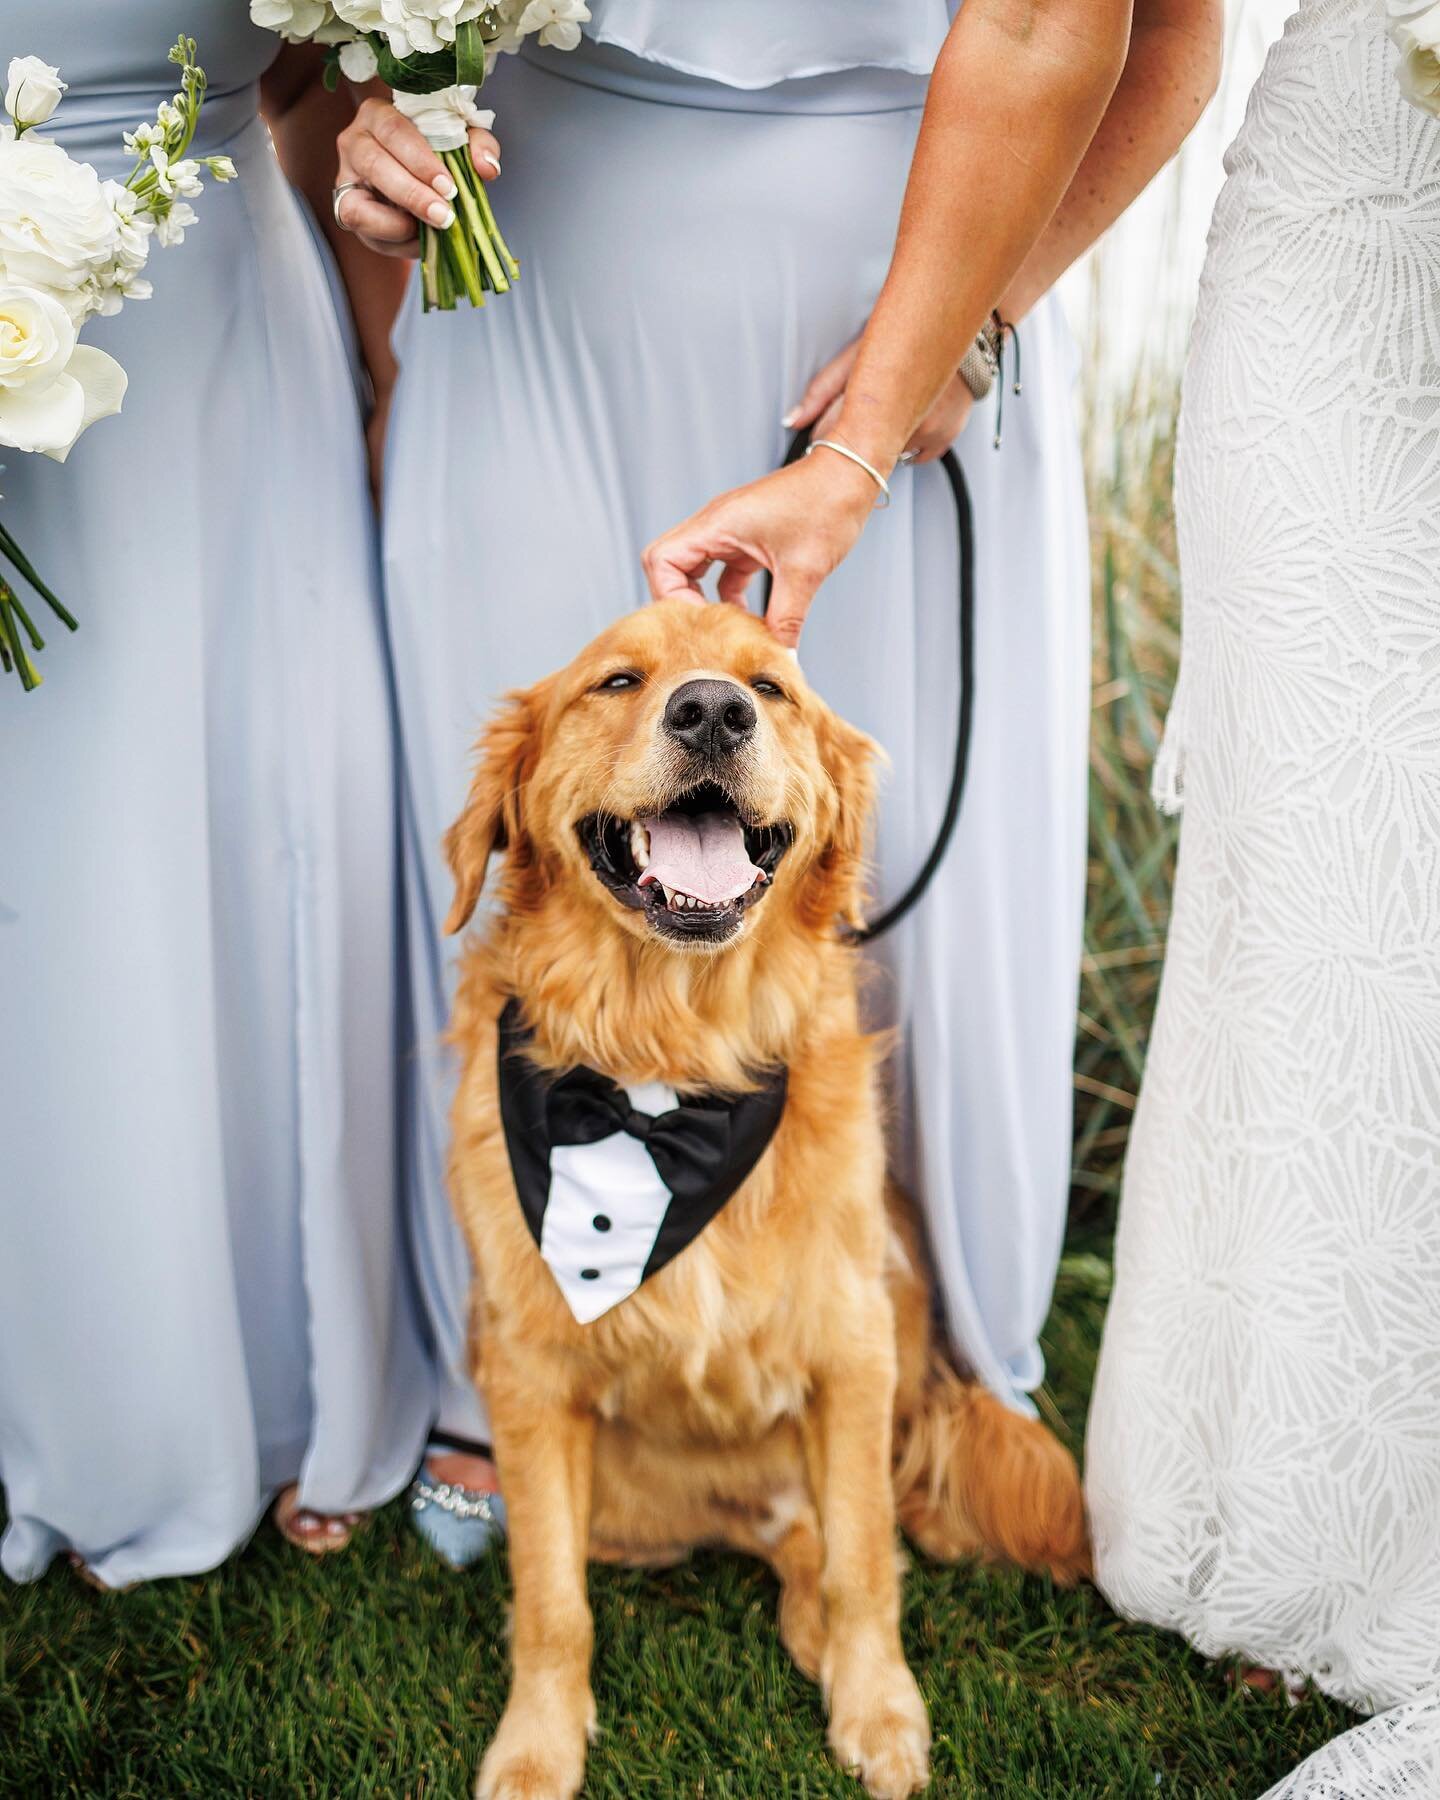 Bride: &ldquo;We want photos with our dog Rambo.&rdquo; Me (Getting nervous from name) &ldquo;is he friendly?&rdquo;
Bride: &ldquo;Yes, most definitely.&rdquo;